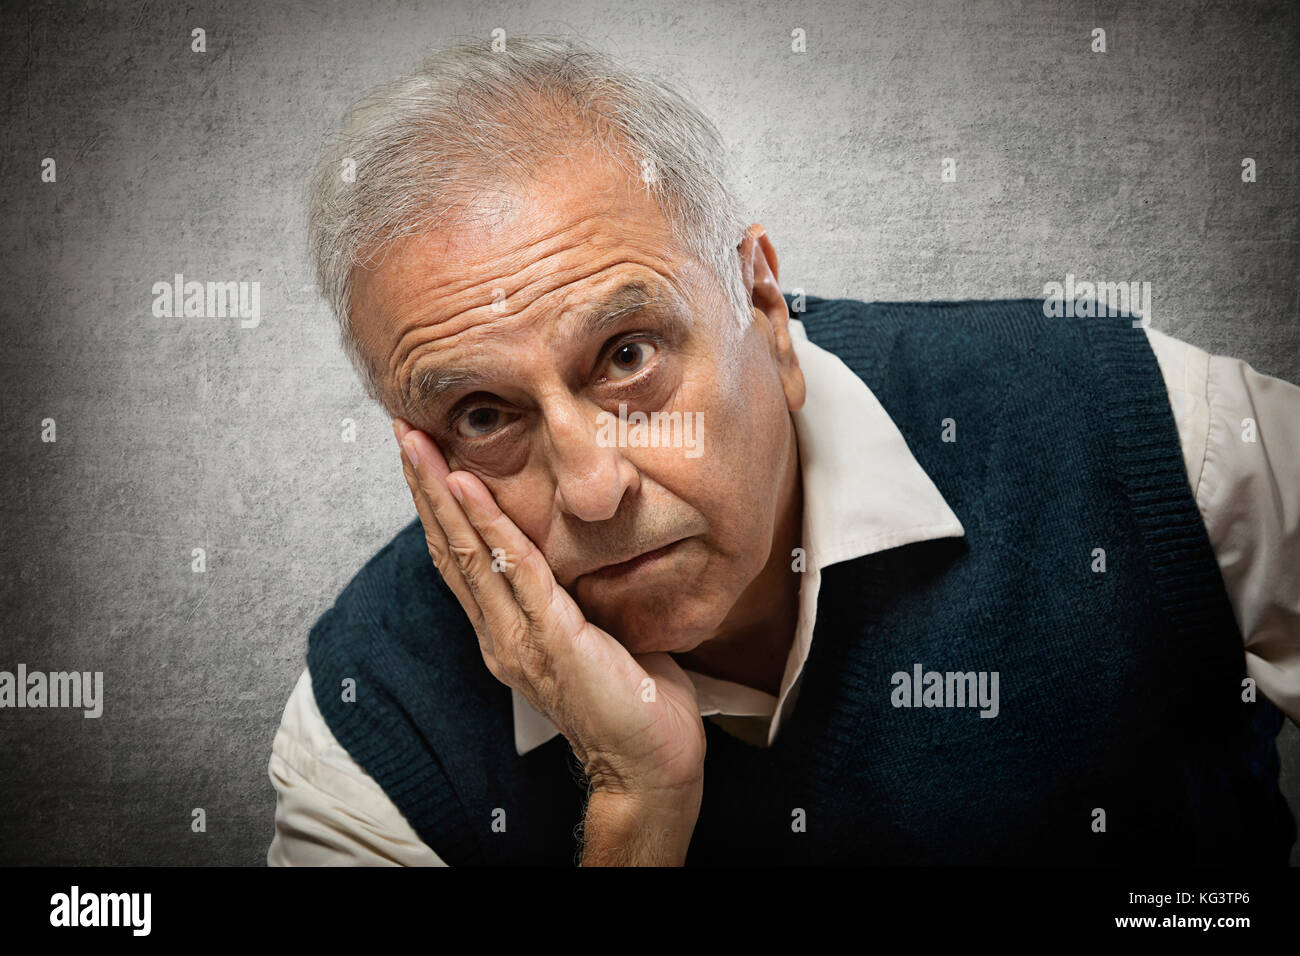 Portrait of a senior man with hand on face Stock Photo